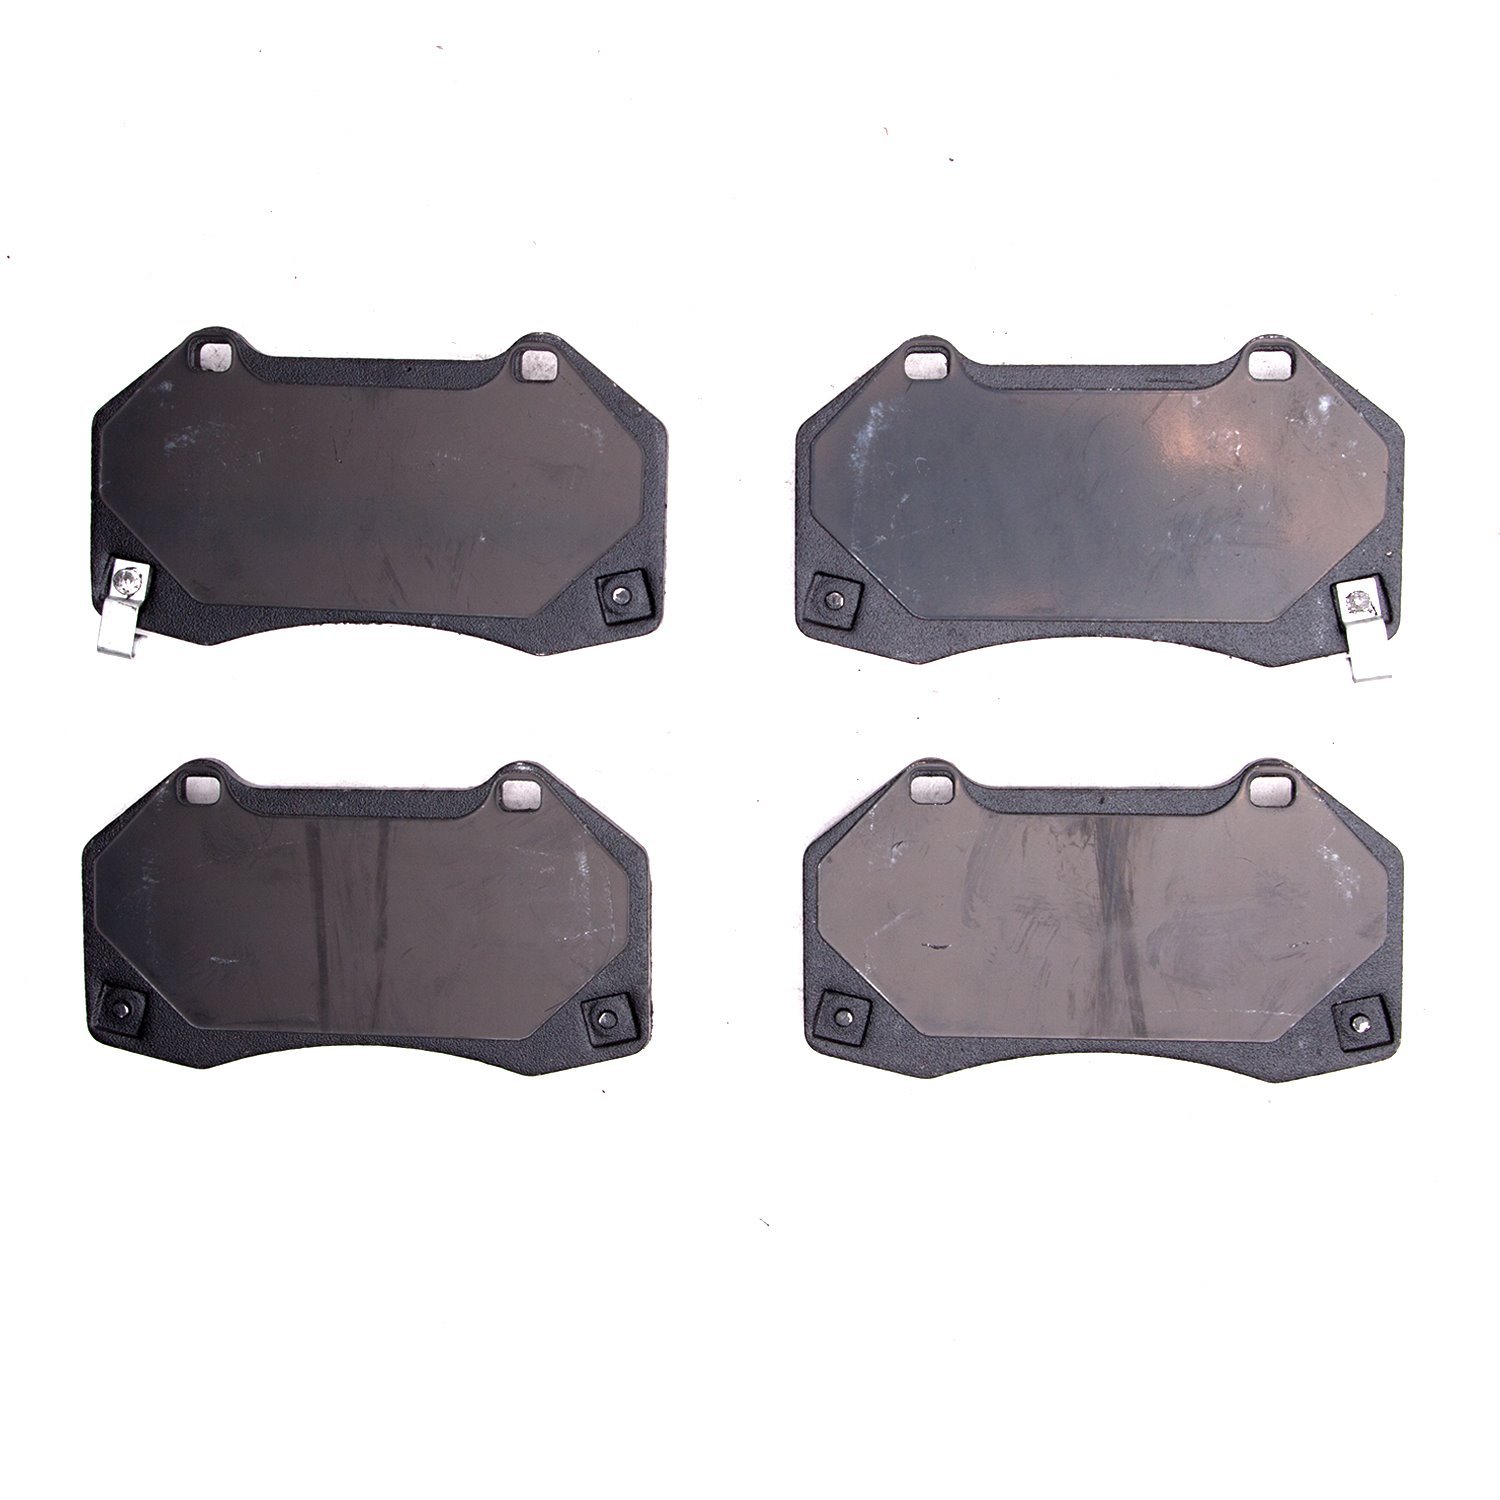 1551-1379-20 5000 Advanced Low-Metallic Brake Pads, Fits Select Multiple Makes/Models, Position: Front